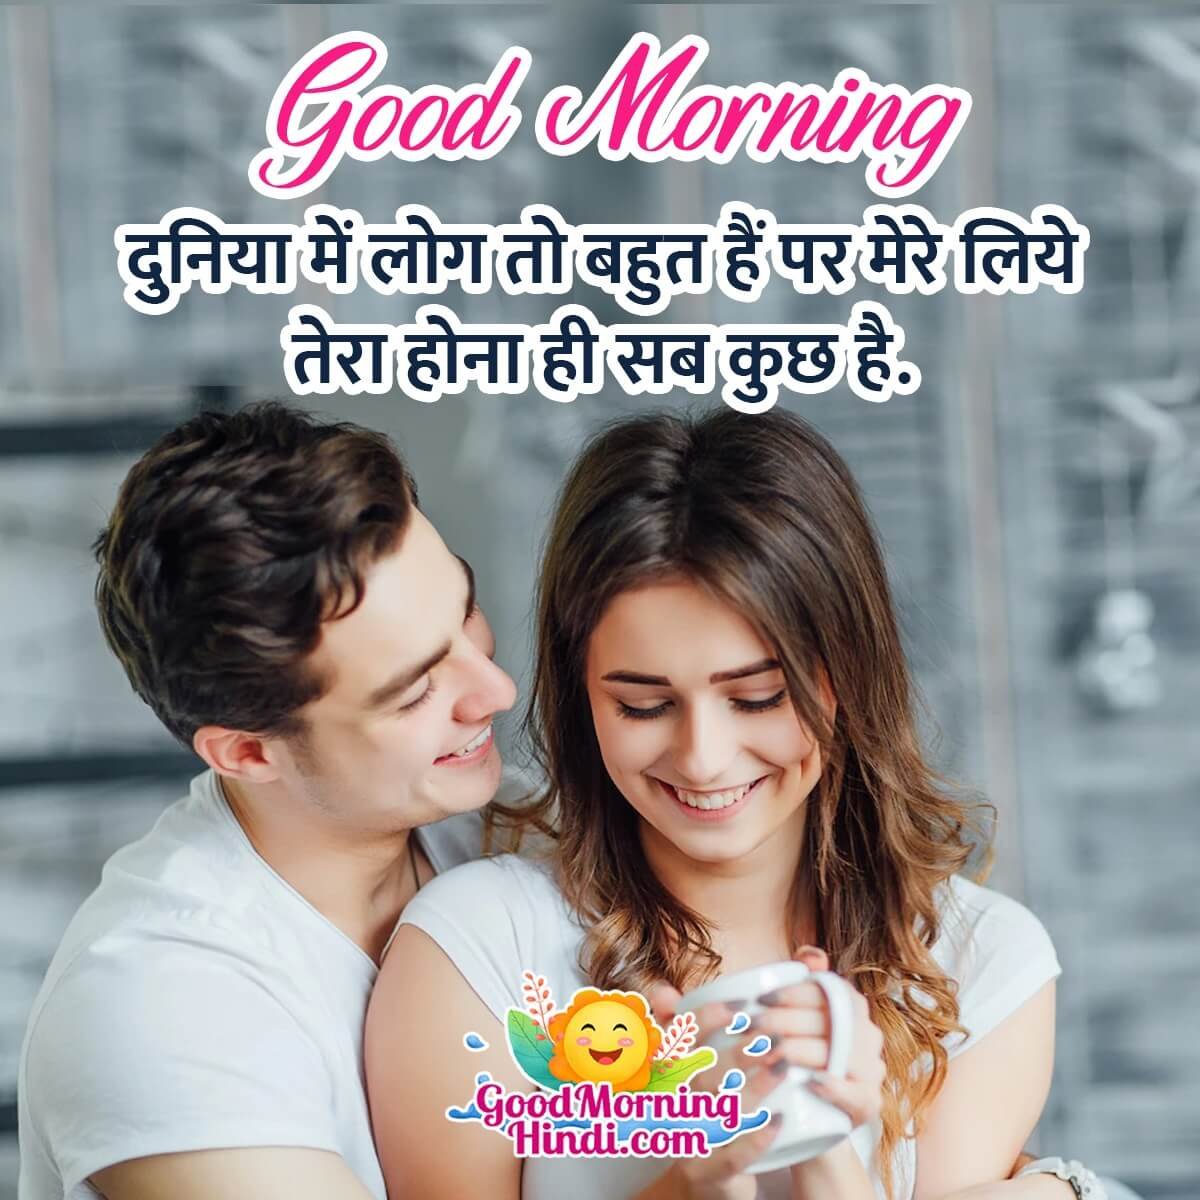 Romantic Good Morning Messages in Hindi - Good Morning Wishes ...